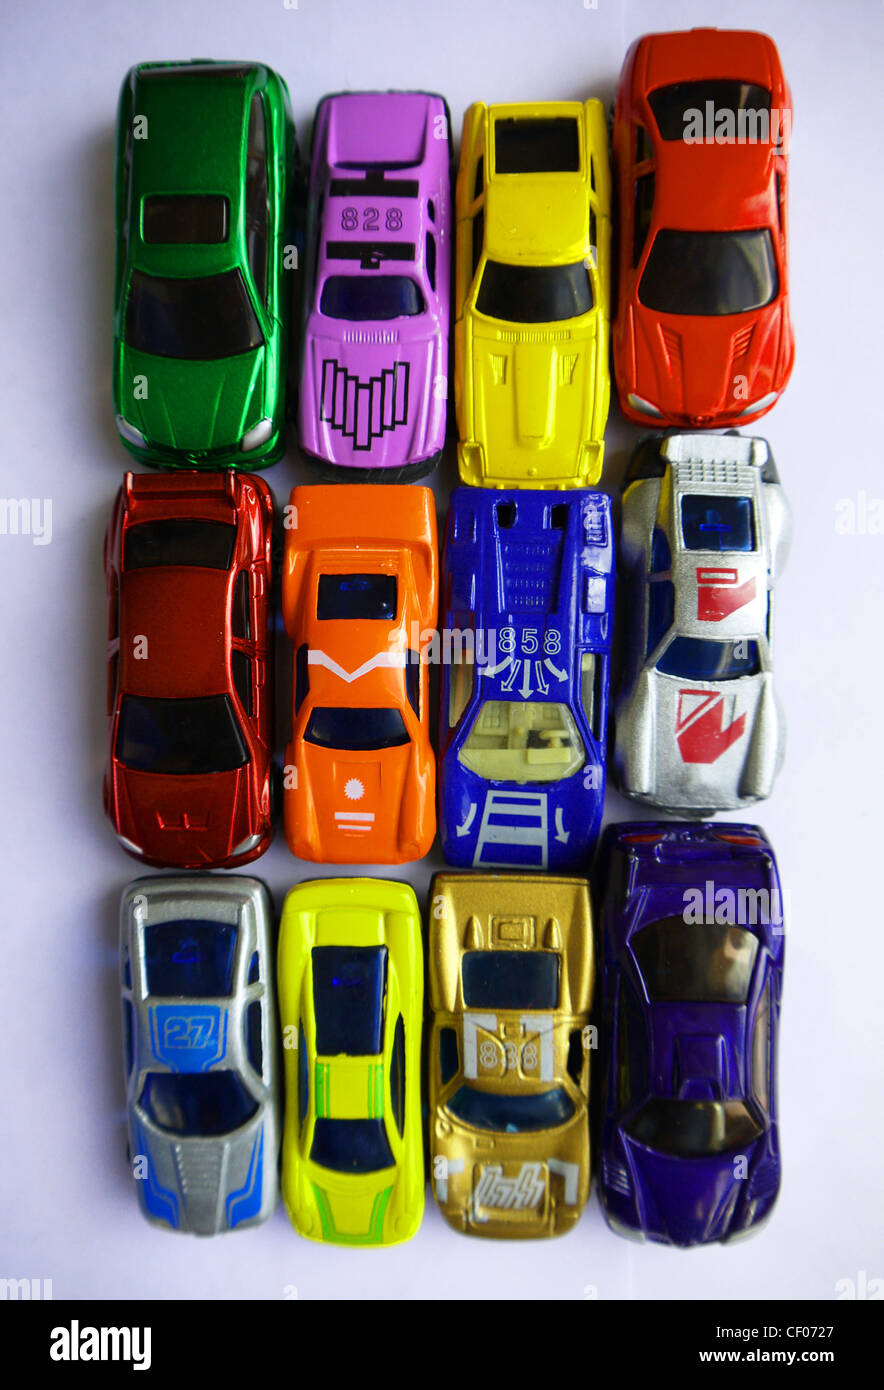 12 toy cars on a white background Stock Photo